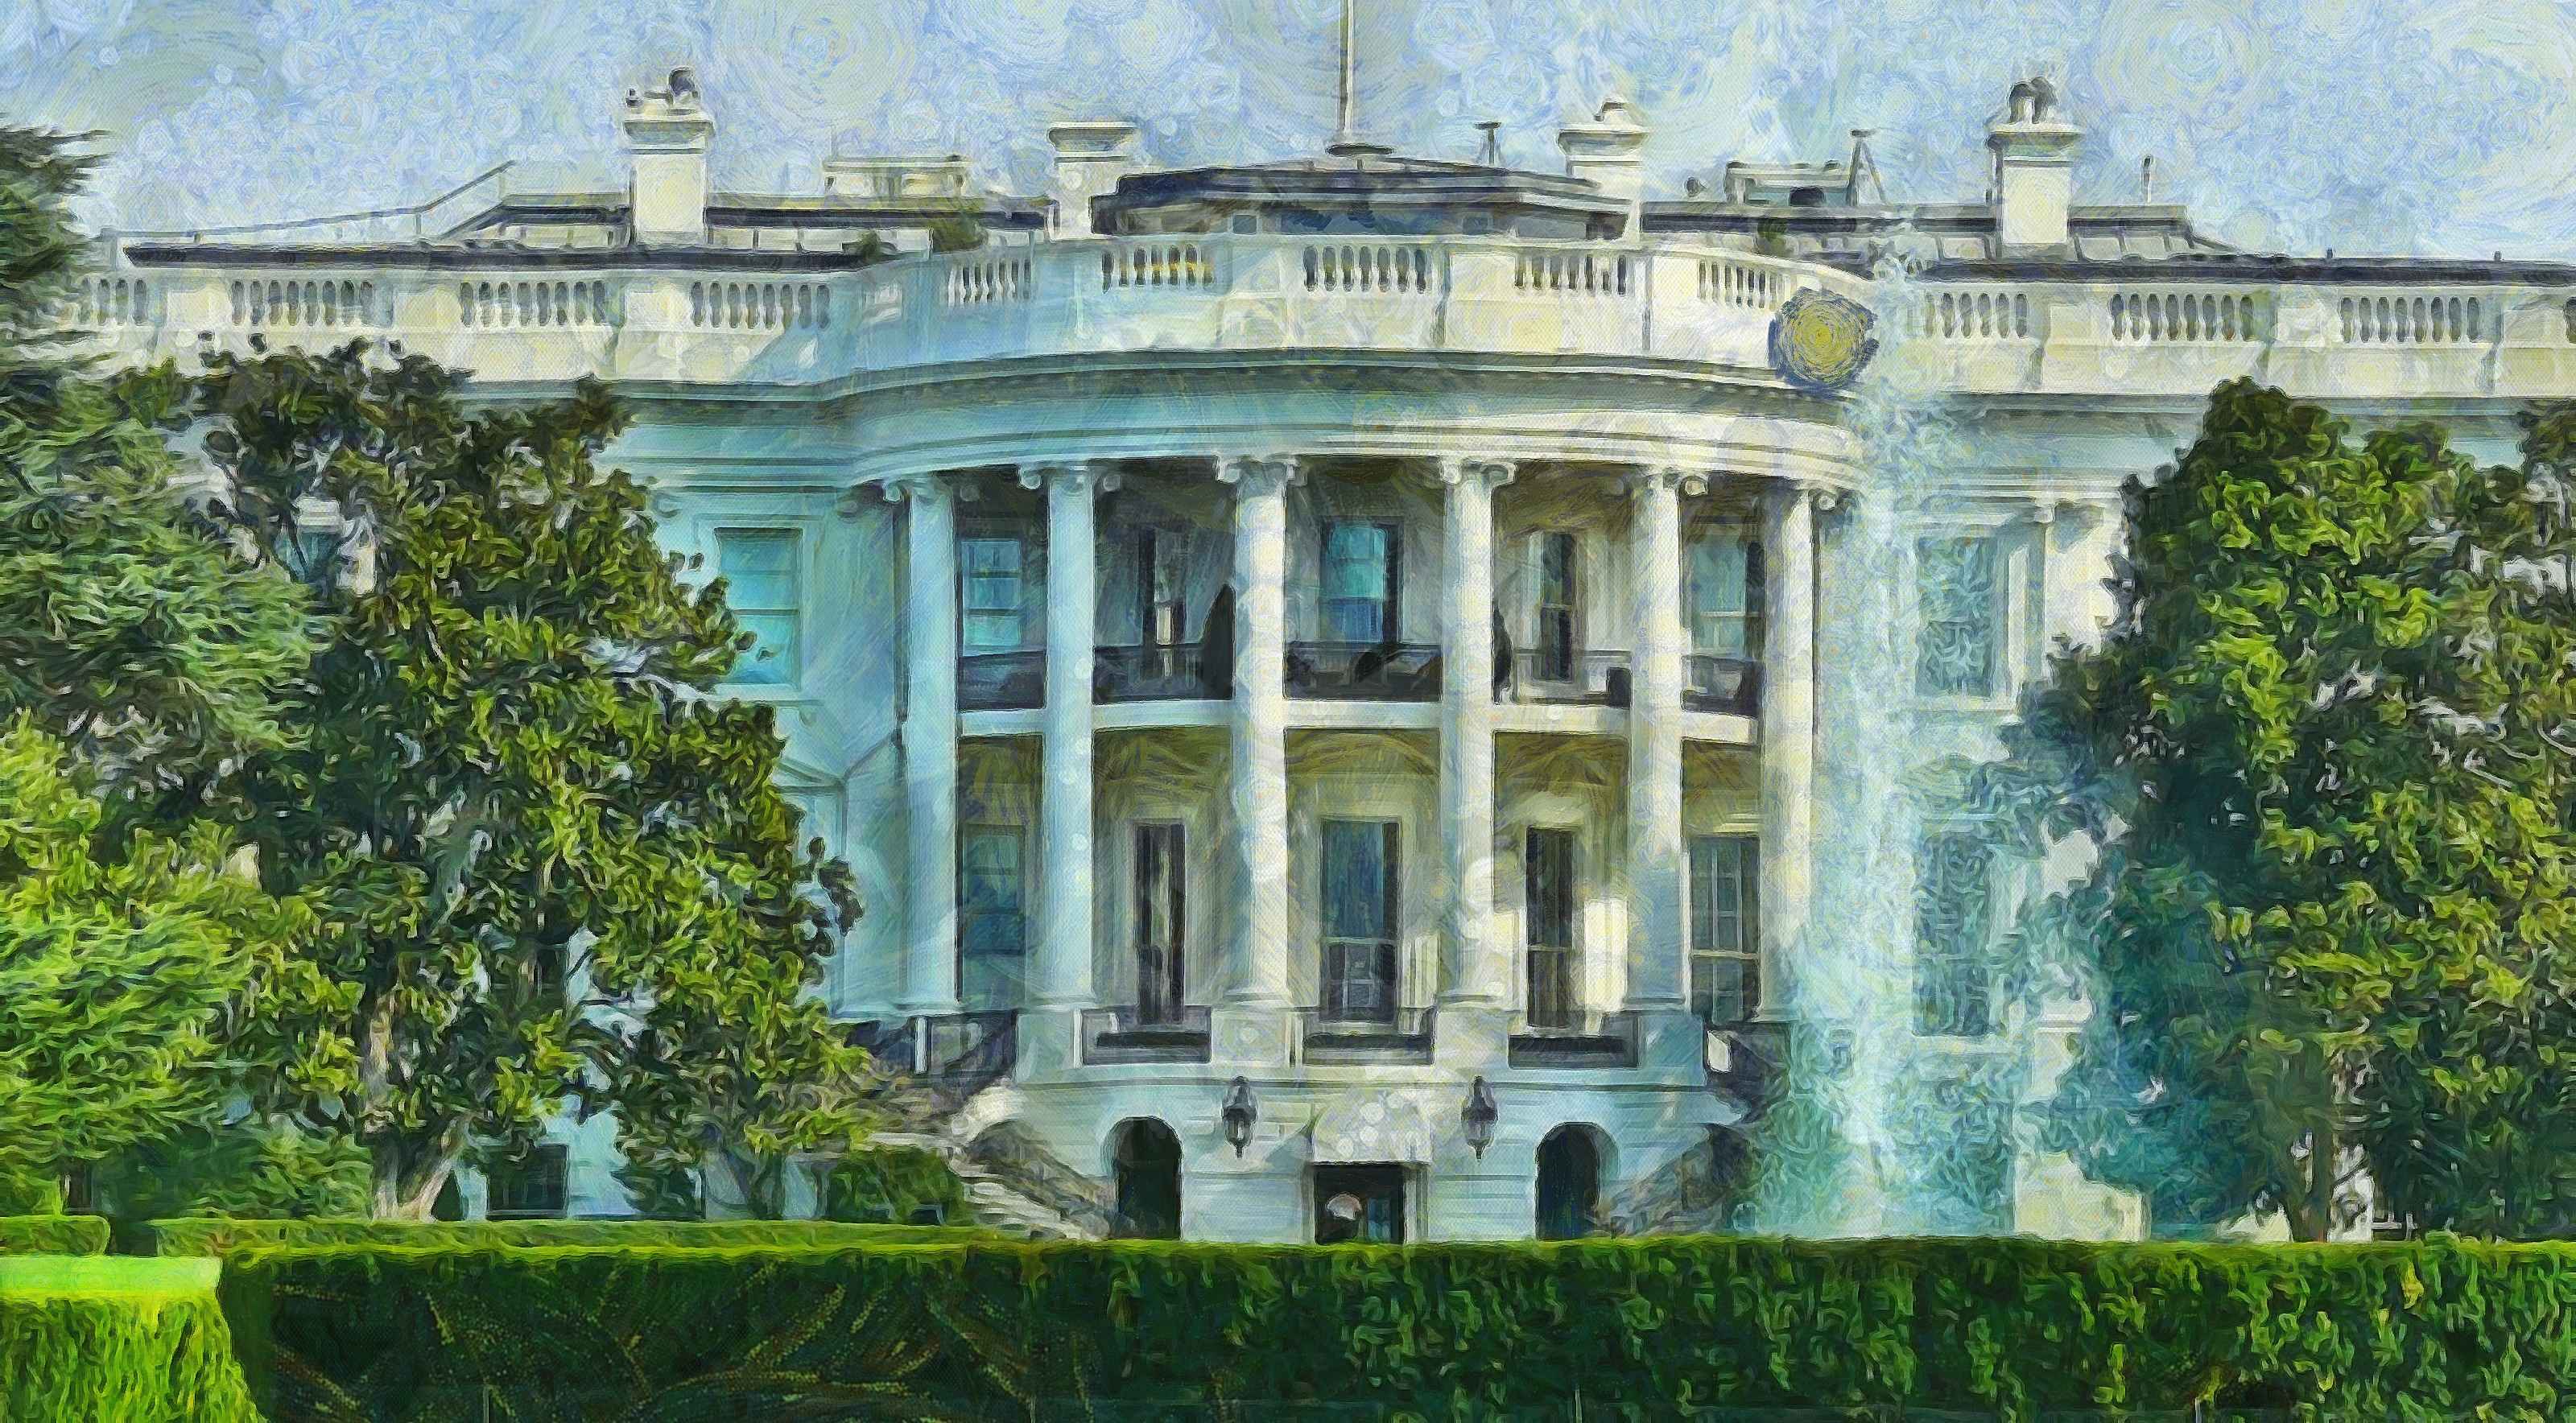 Facts about the White House